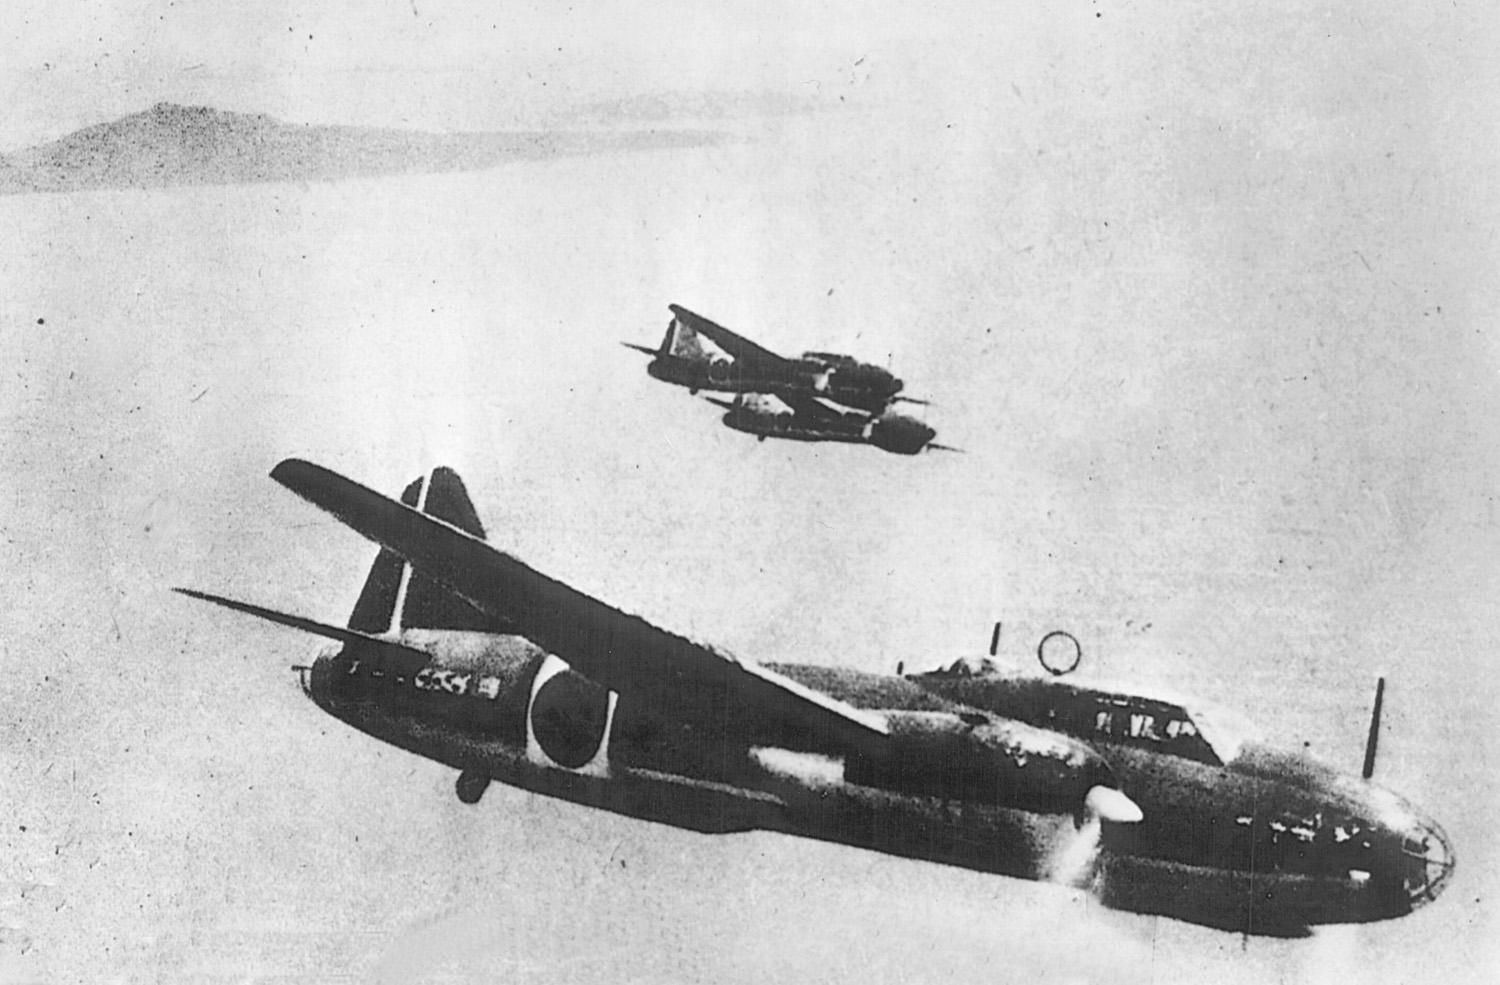 Japanese Mitsubishi G4M2 Betty bombers, similar to those used in some attacks against American air bases in the Marianas, wing their way toward a target. The vulnerable Betty was later replaced largely by the twin-engined KI-67 Hiryu, codenamed Peggy by the Allies.